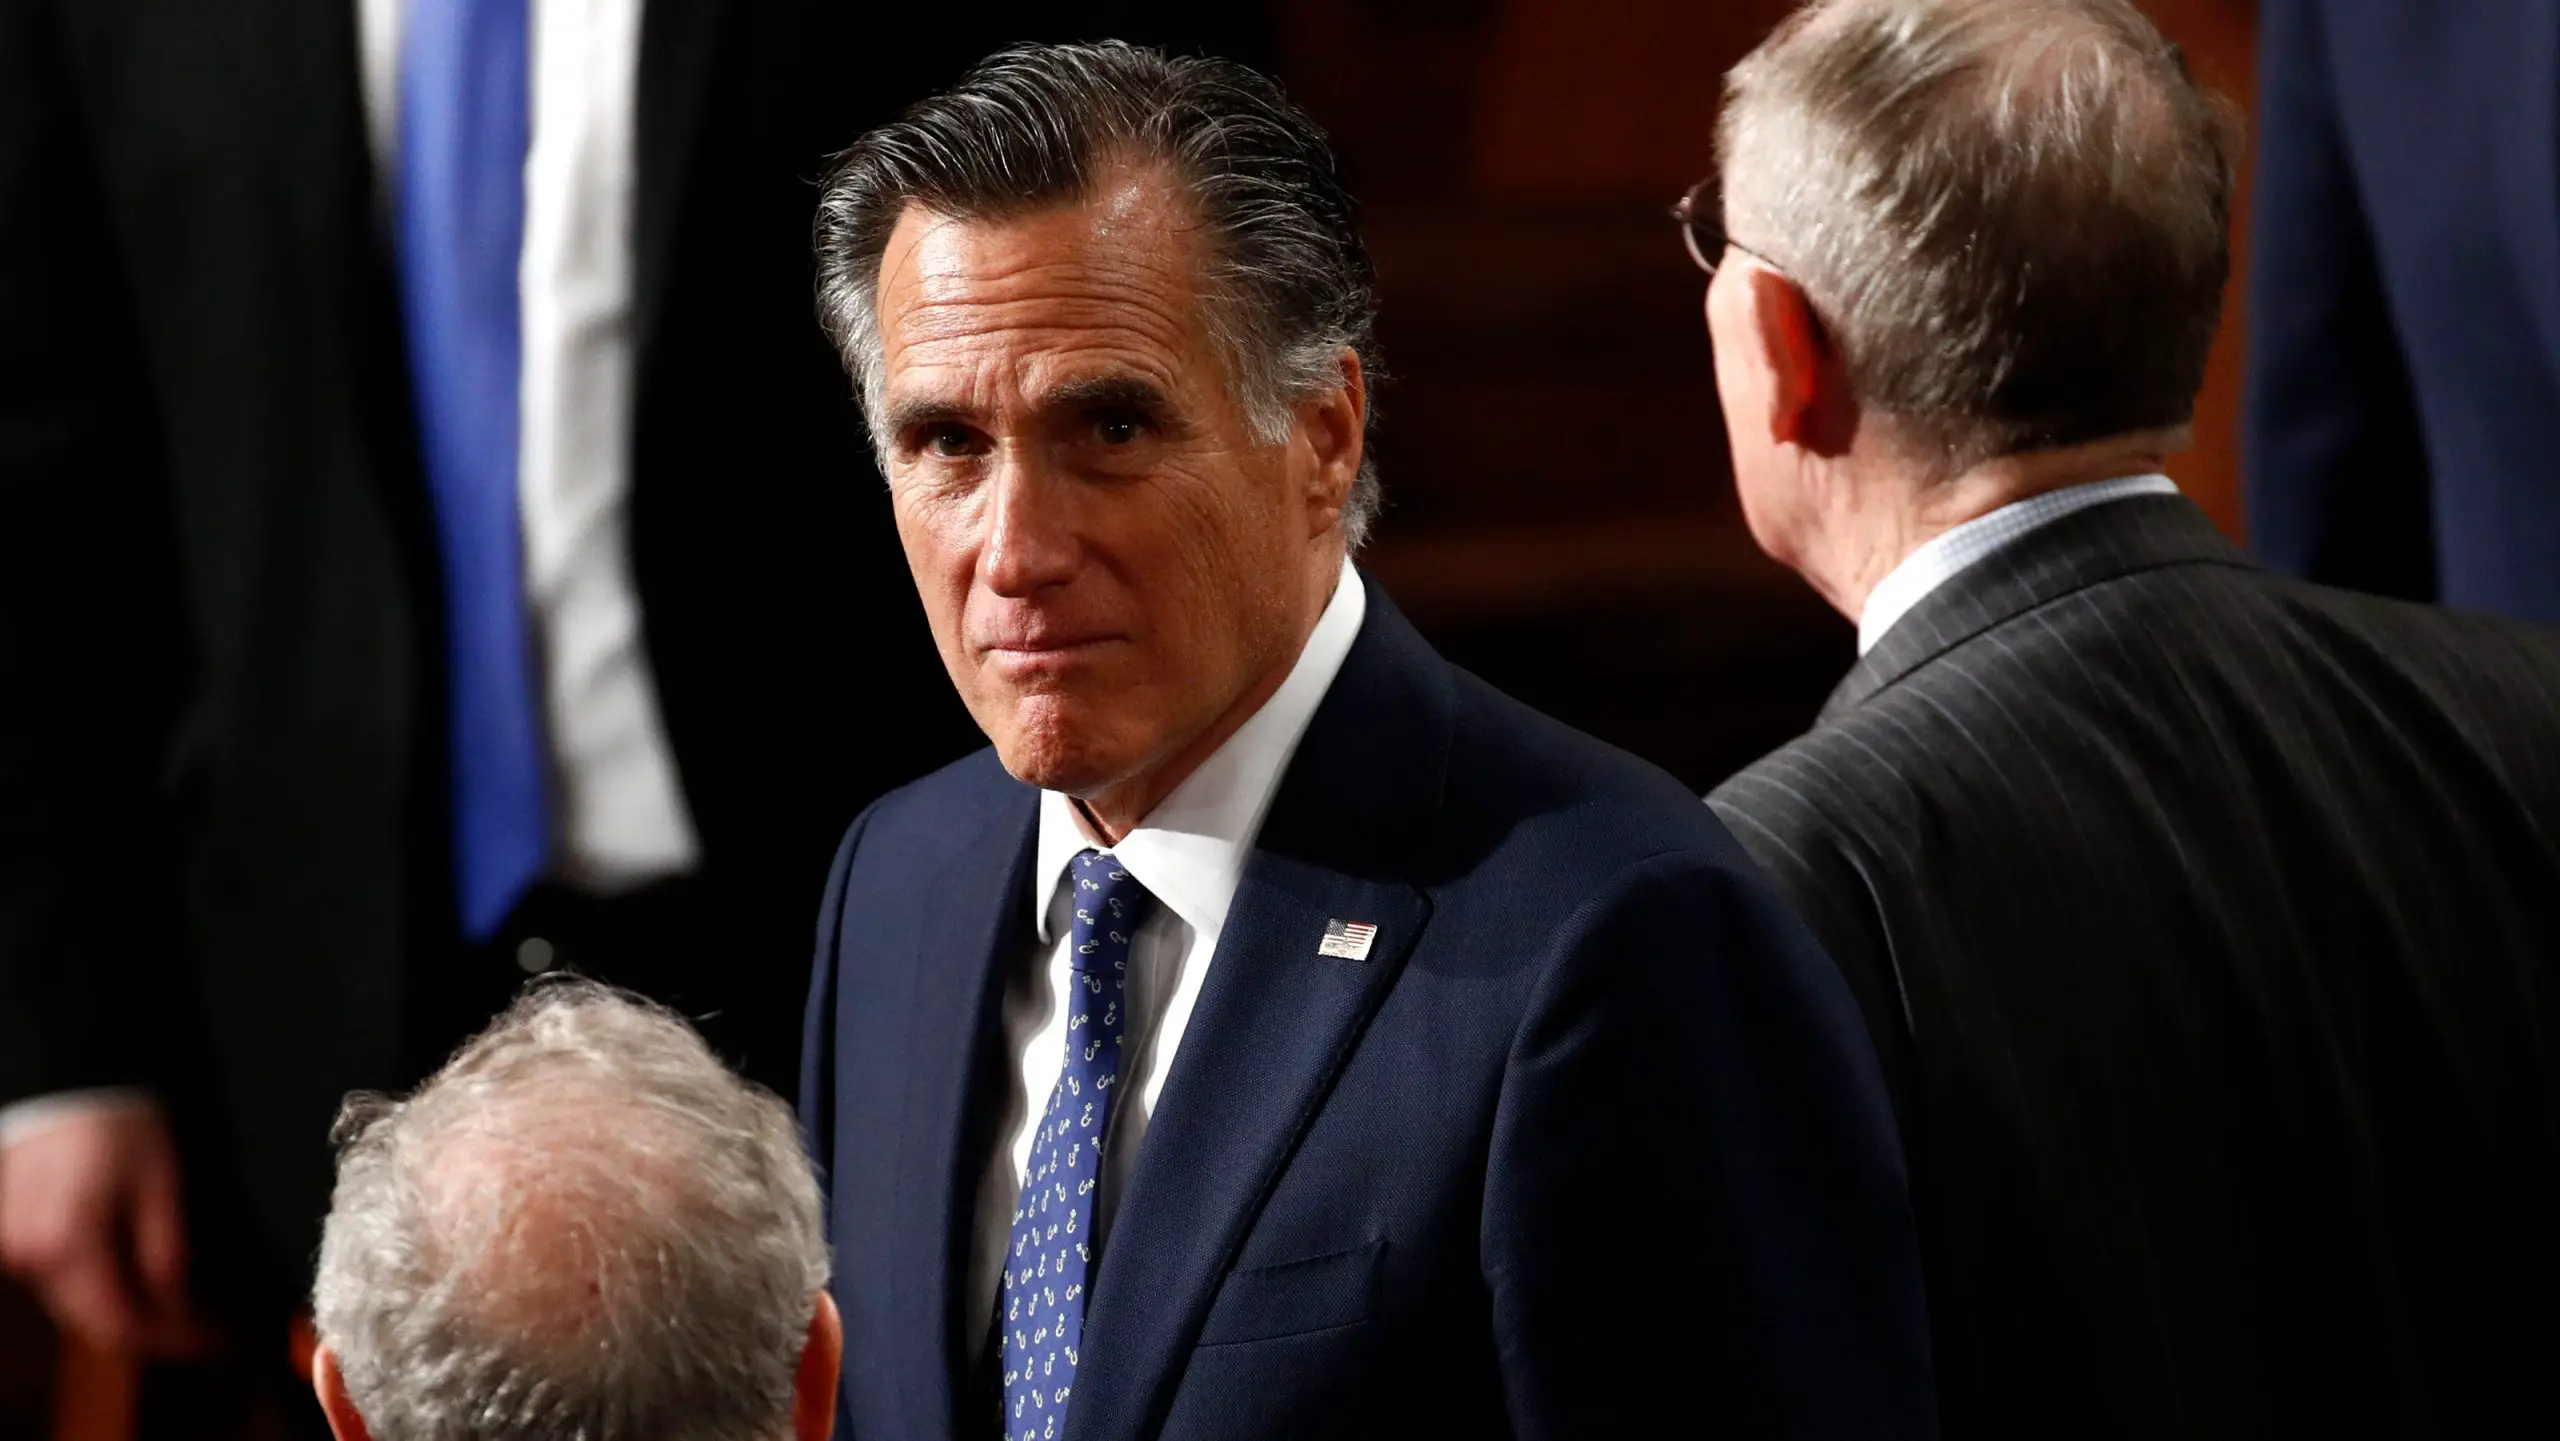 Mitt Romney impeachment vote approved by voters 50%